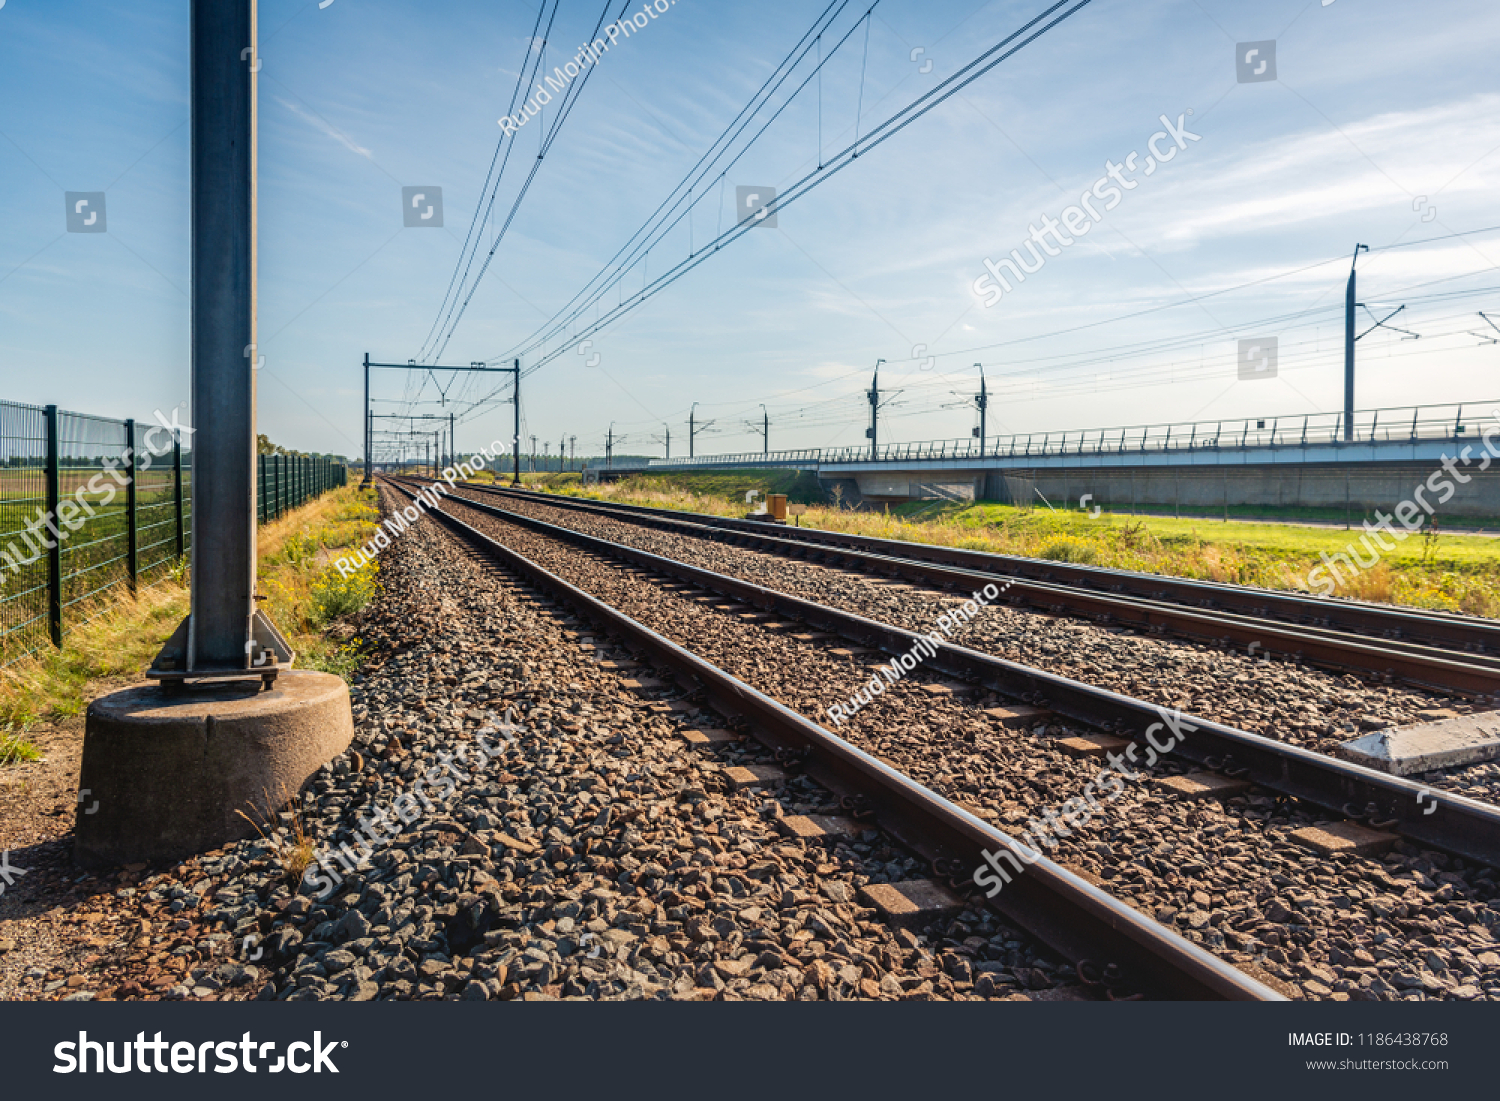 Seeminly endless train tracks on concrete sleepers and basalt gravel in the Netherlands. The photo was taken on a sunny summer day near the village of Lage Zwaluwe. In the background is the HSL line. #1186438768